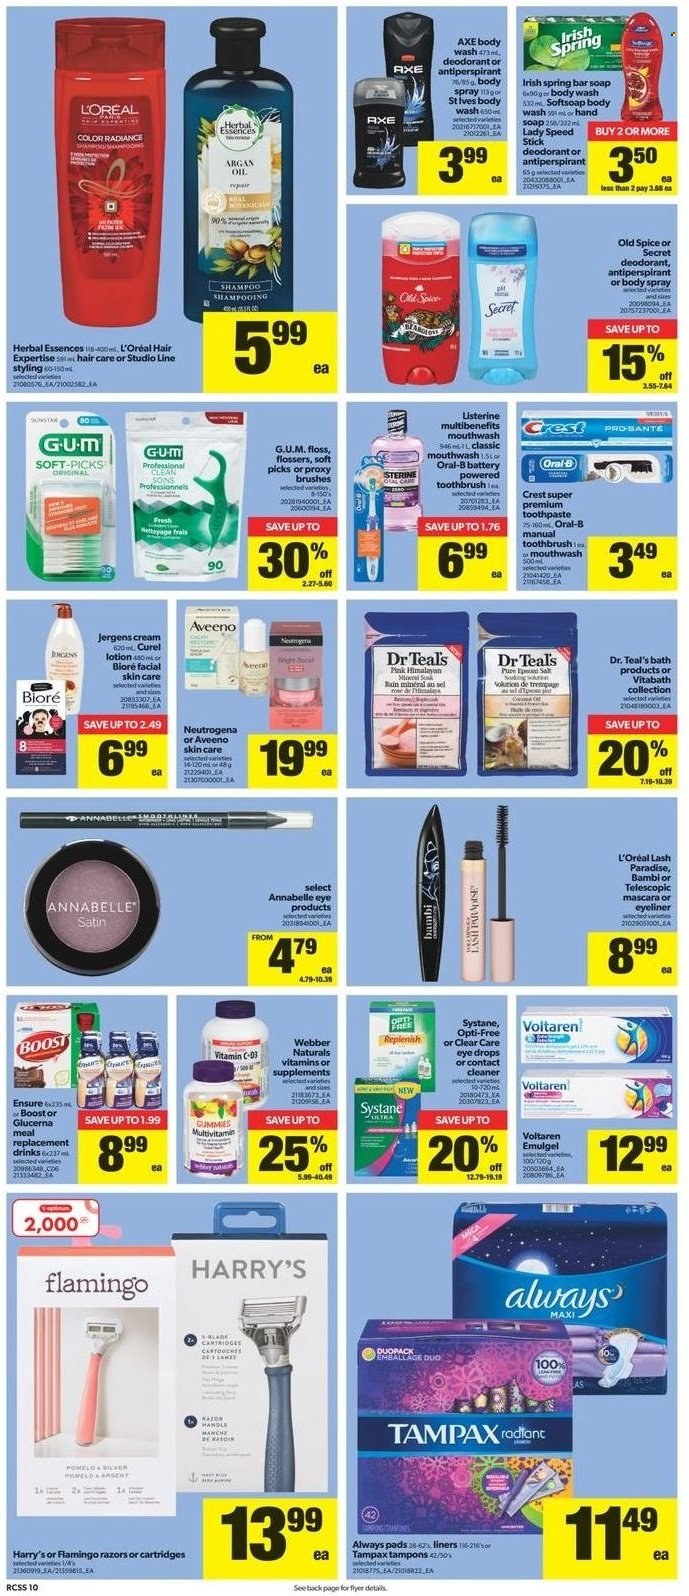 thumbnail - Real Canadian Superstore Flyer - January 13, 2022 - January 19, 2022 - Sales products - pomelo, salt, spice, Boost, Aveeno, cleaner, body wash, Softsoap, hand soap, soap bar, soap, toothbrush, toothpaste, mouthwash, Crest, Always pads, tampons, L’Oréal, Curél, Bioré®, Herbal Essences, body lotion, body spray, Jergens, anti-perspirant, Speed Stick, mascara, eyeliner, Clear Care, multivitamin, vitamin c, Glucerna, eye drops, argan oil, Listerine, Neutrogena, shampoo, Systane, Tampax, Old Spice, Oral-B, deodorant. Page 10.